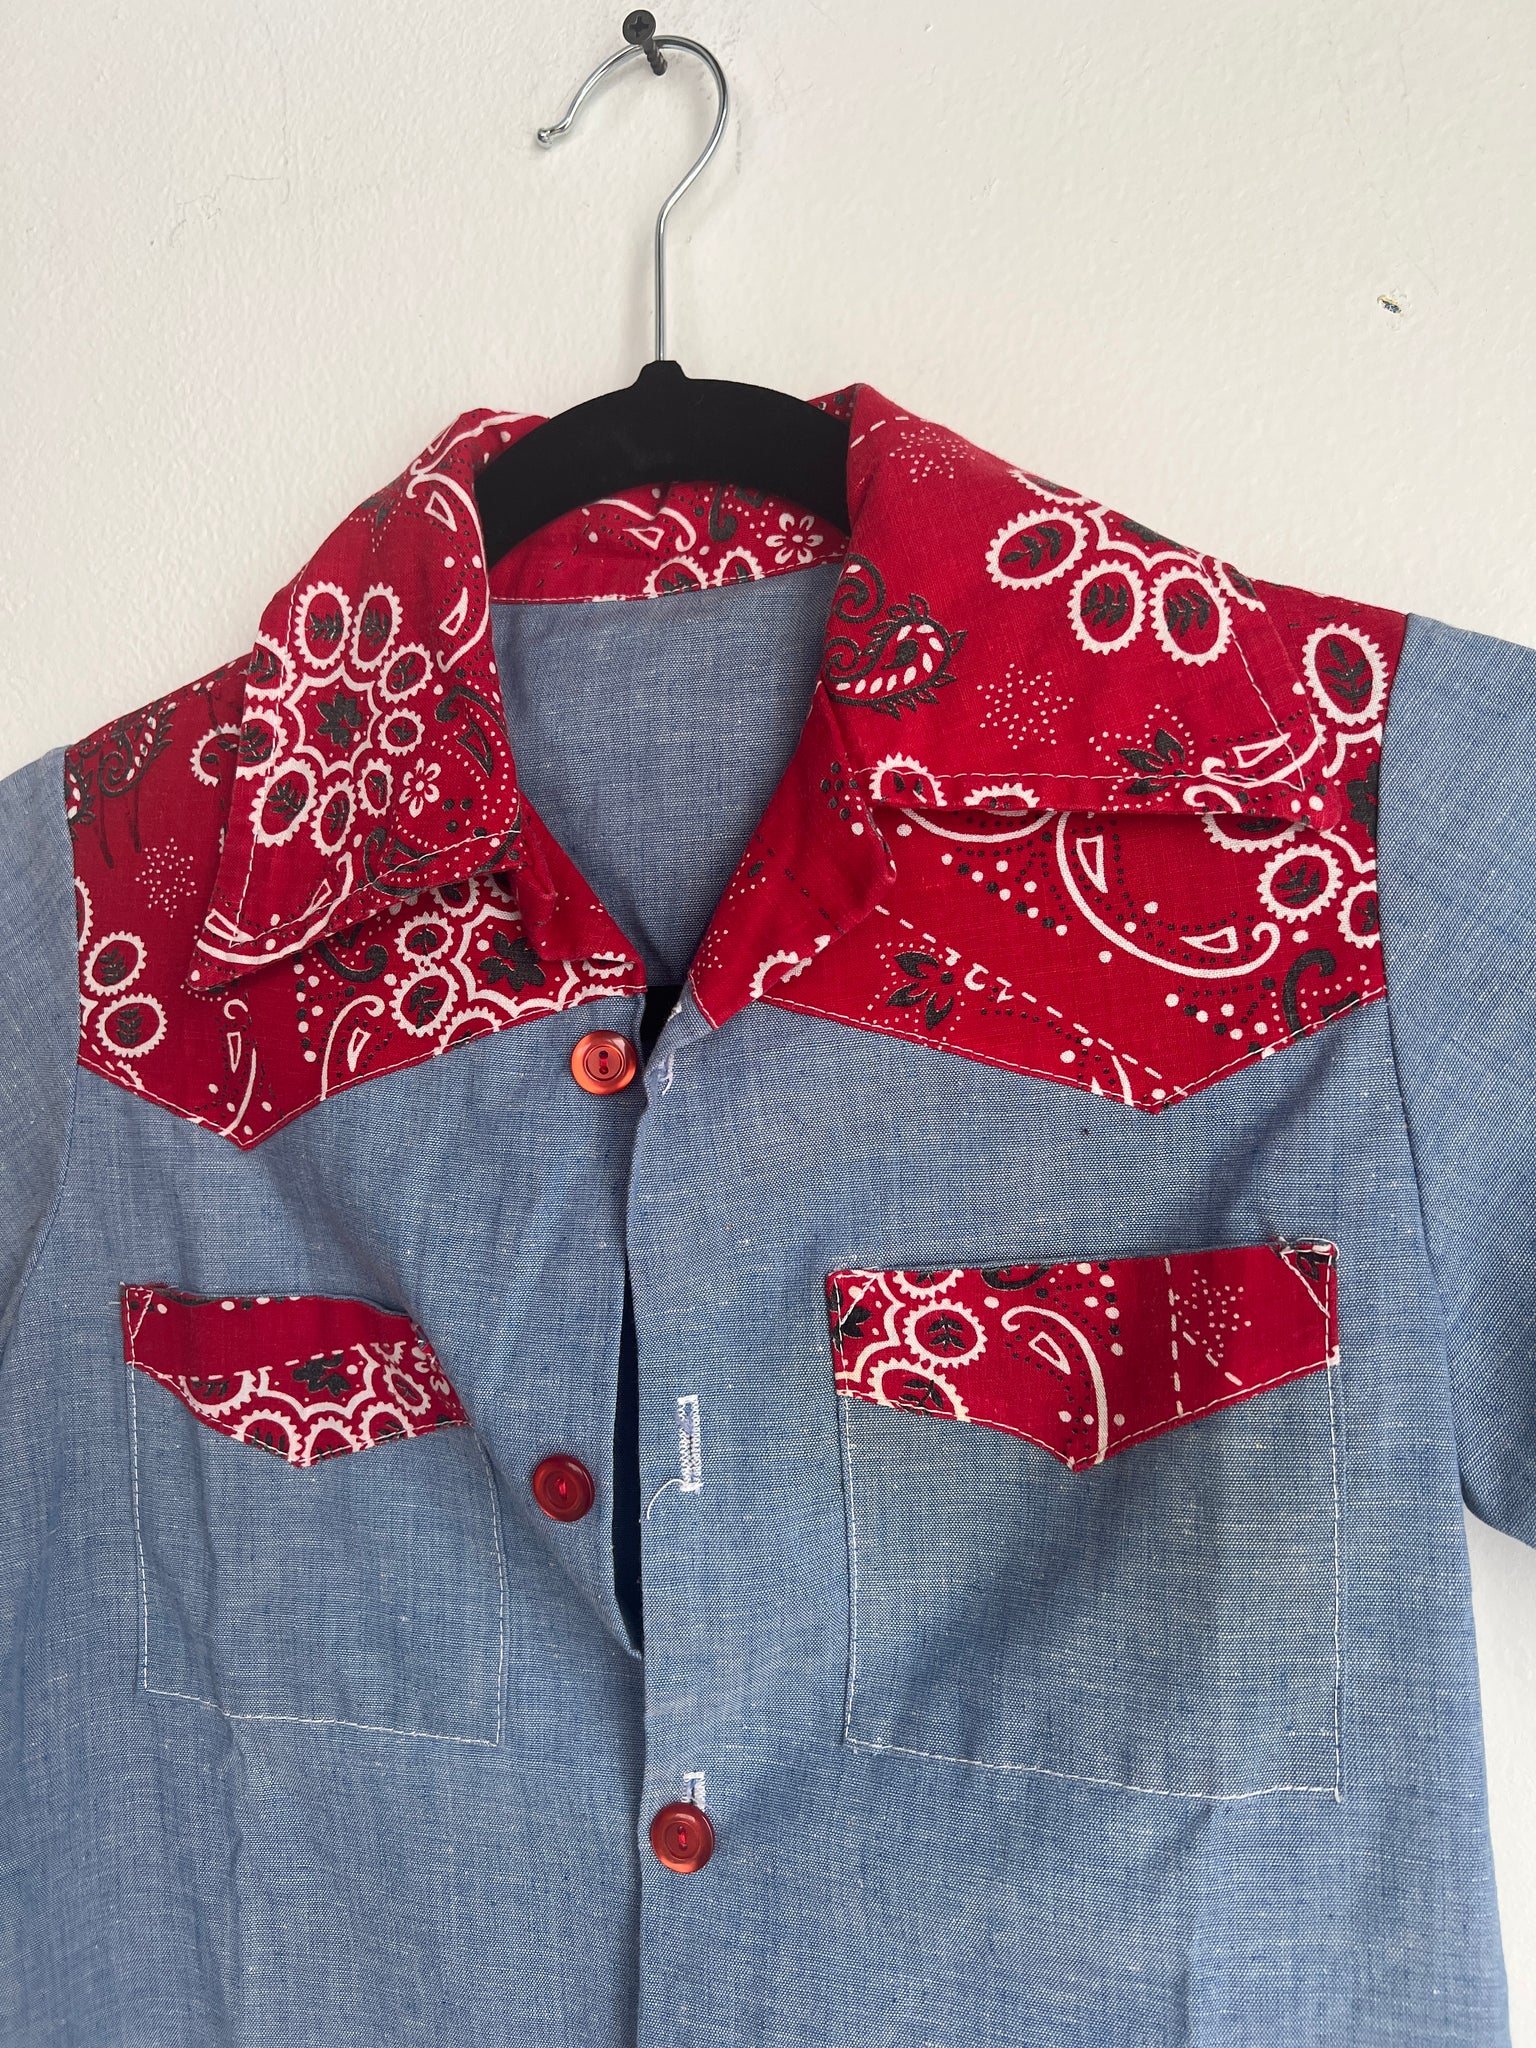 1970s KIDS TOPS- chambray w/ red bandana accent s/s button down western